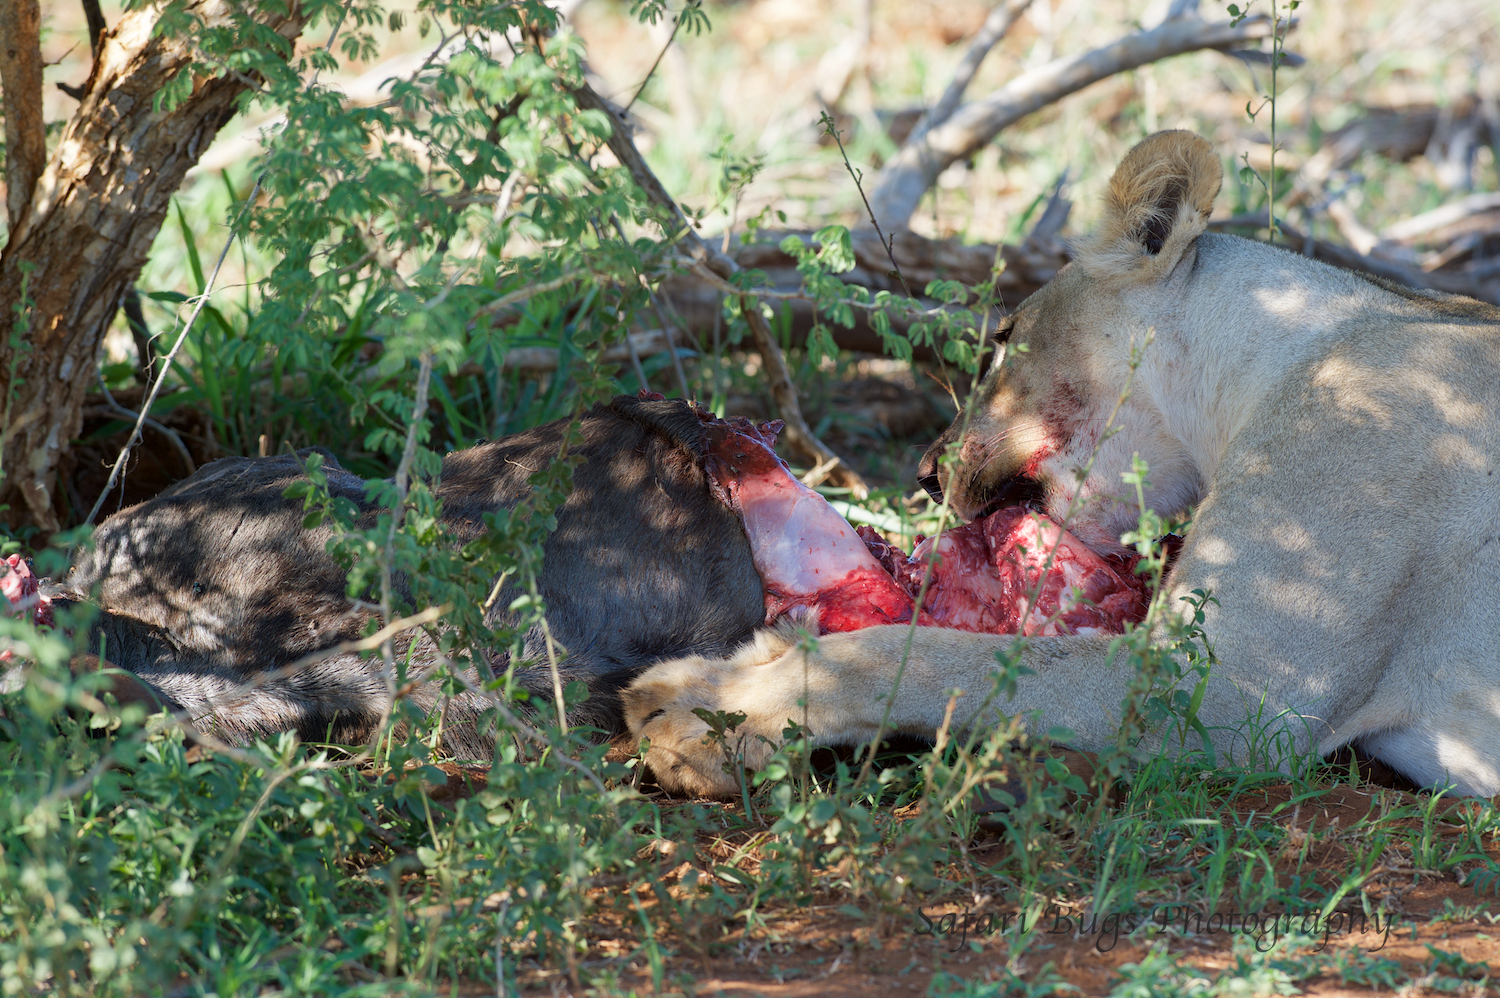  It started with one lioness eating and one sitting in the shade. 